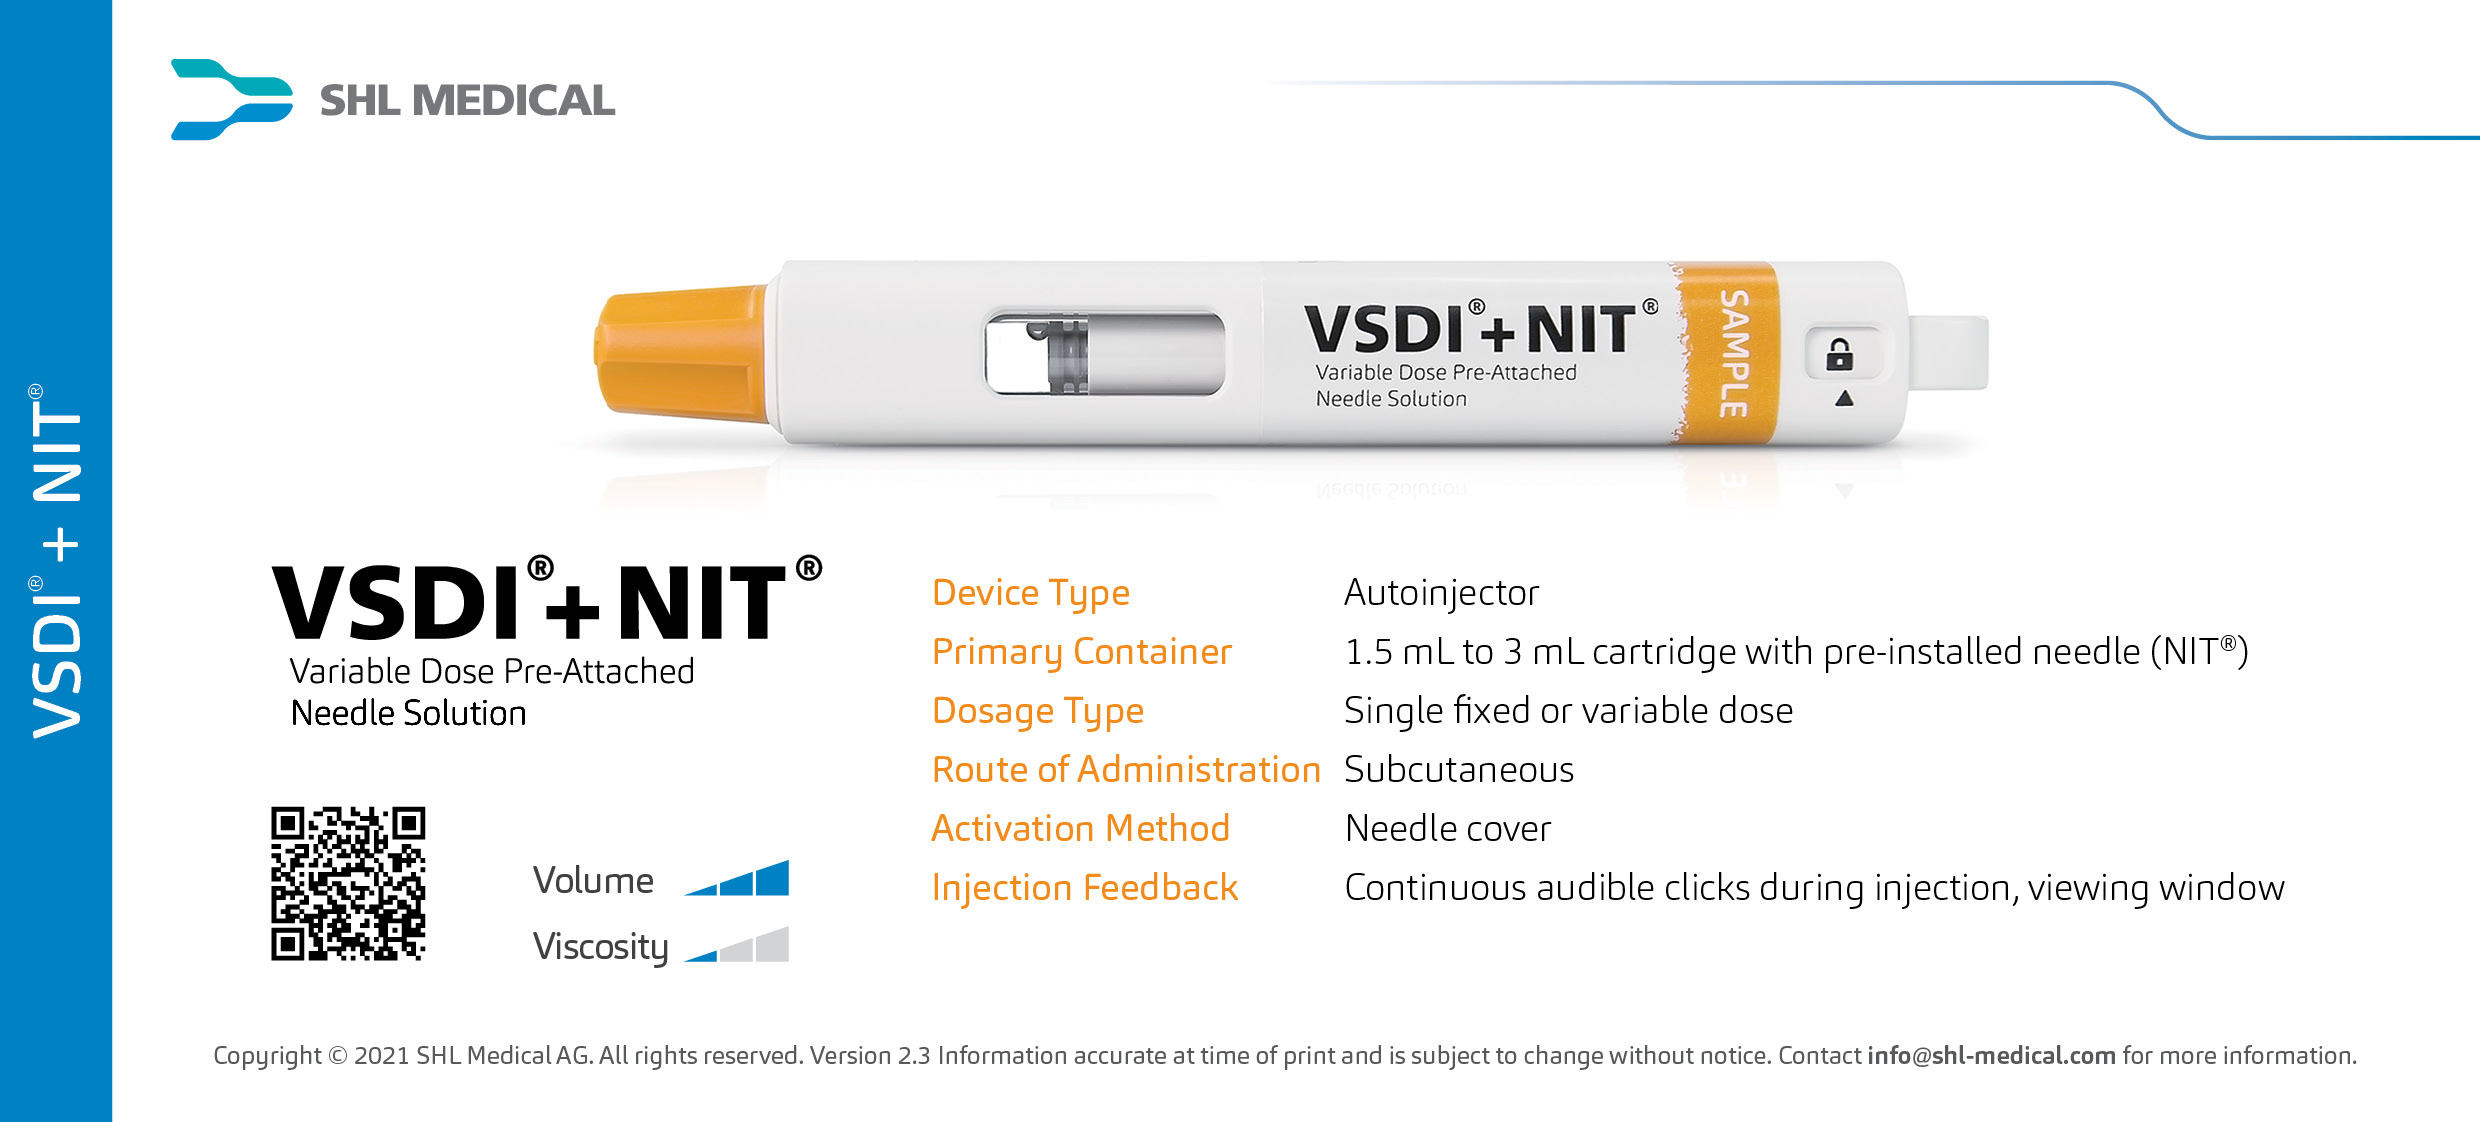 Image of variable single dose VSDI+NIT autoinjector developed by SHL Medical along with its specifications and handling instruction for pre-filled catridges